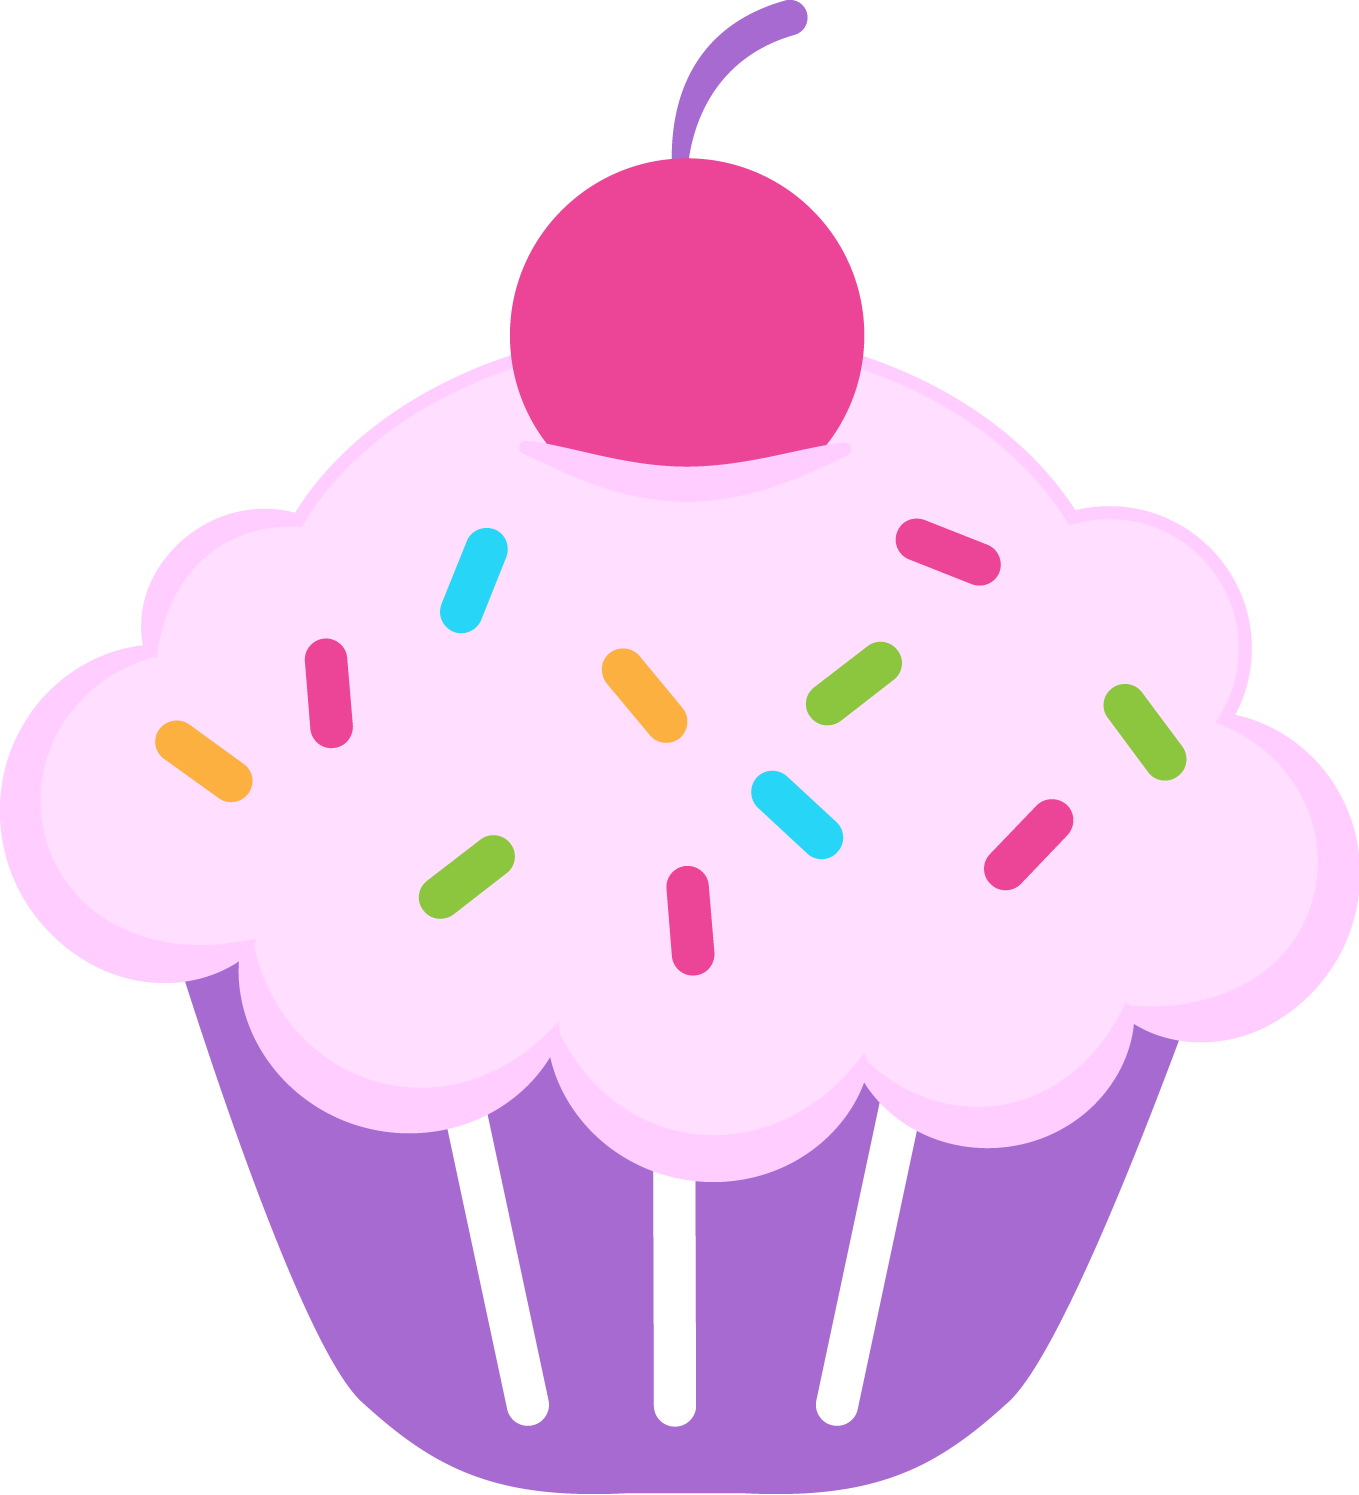 Free Cup Cake Image, Download Free Cup Cake Image png images, Free